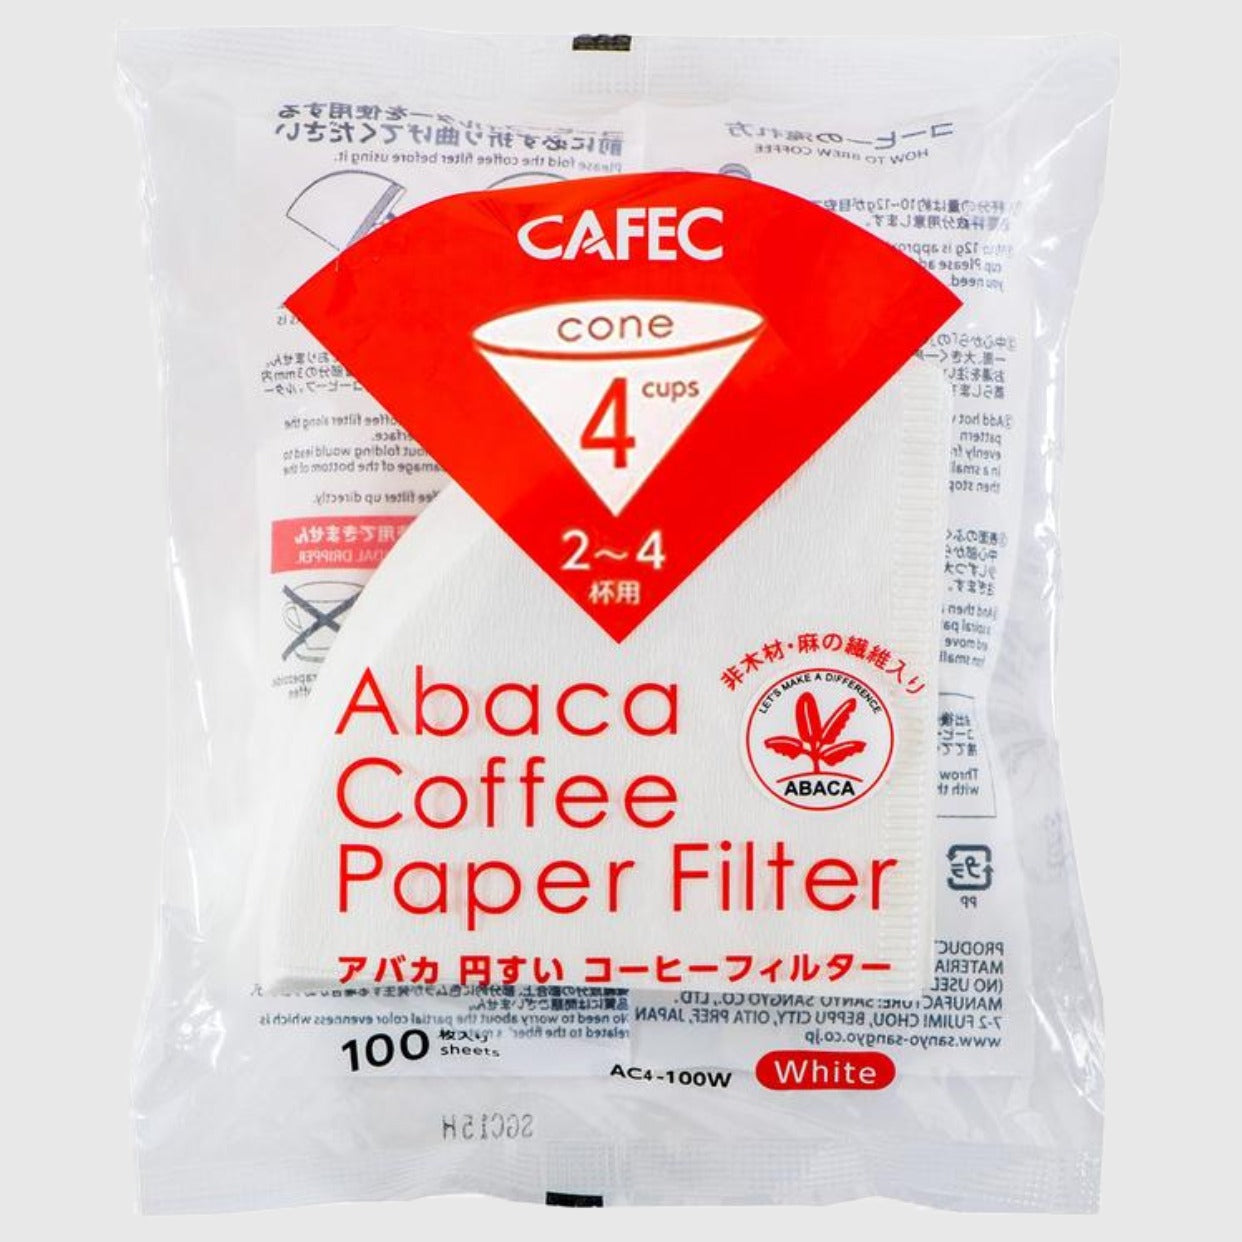 Cafec Abaca Paper Filter Cone 4 cups 02 Basic Barista Australia Melbourne Filter Paper Papers Banana Coffee Filter Brewer cone dripper conical coffee maker papers small smaller size coffee drippers